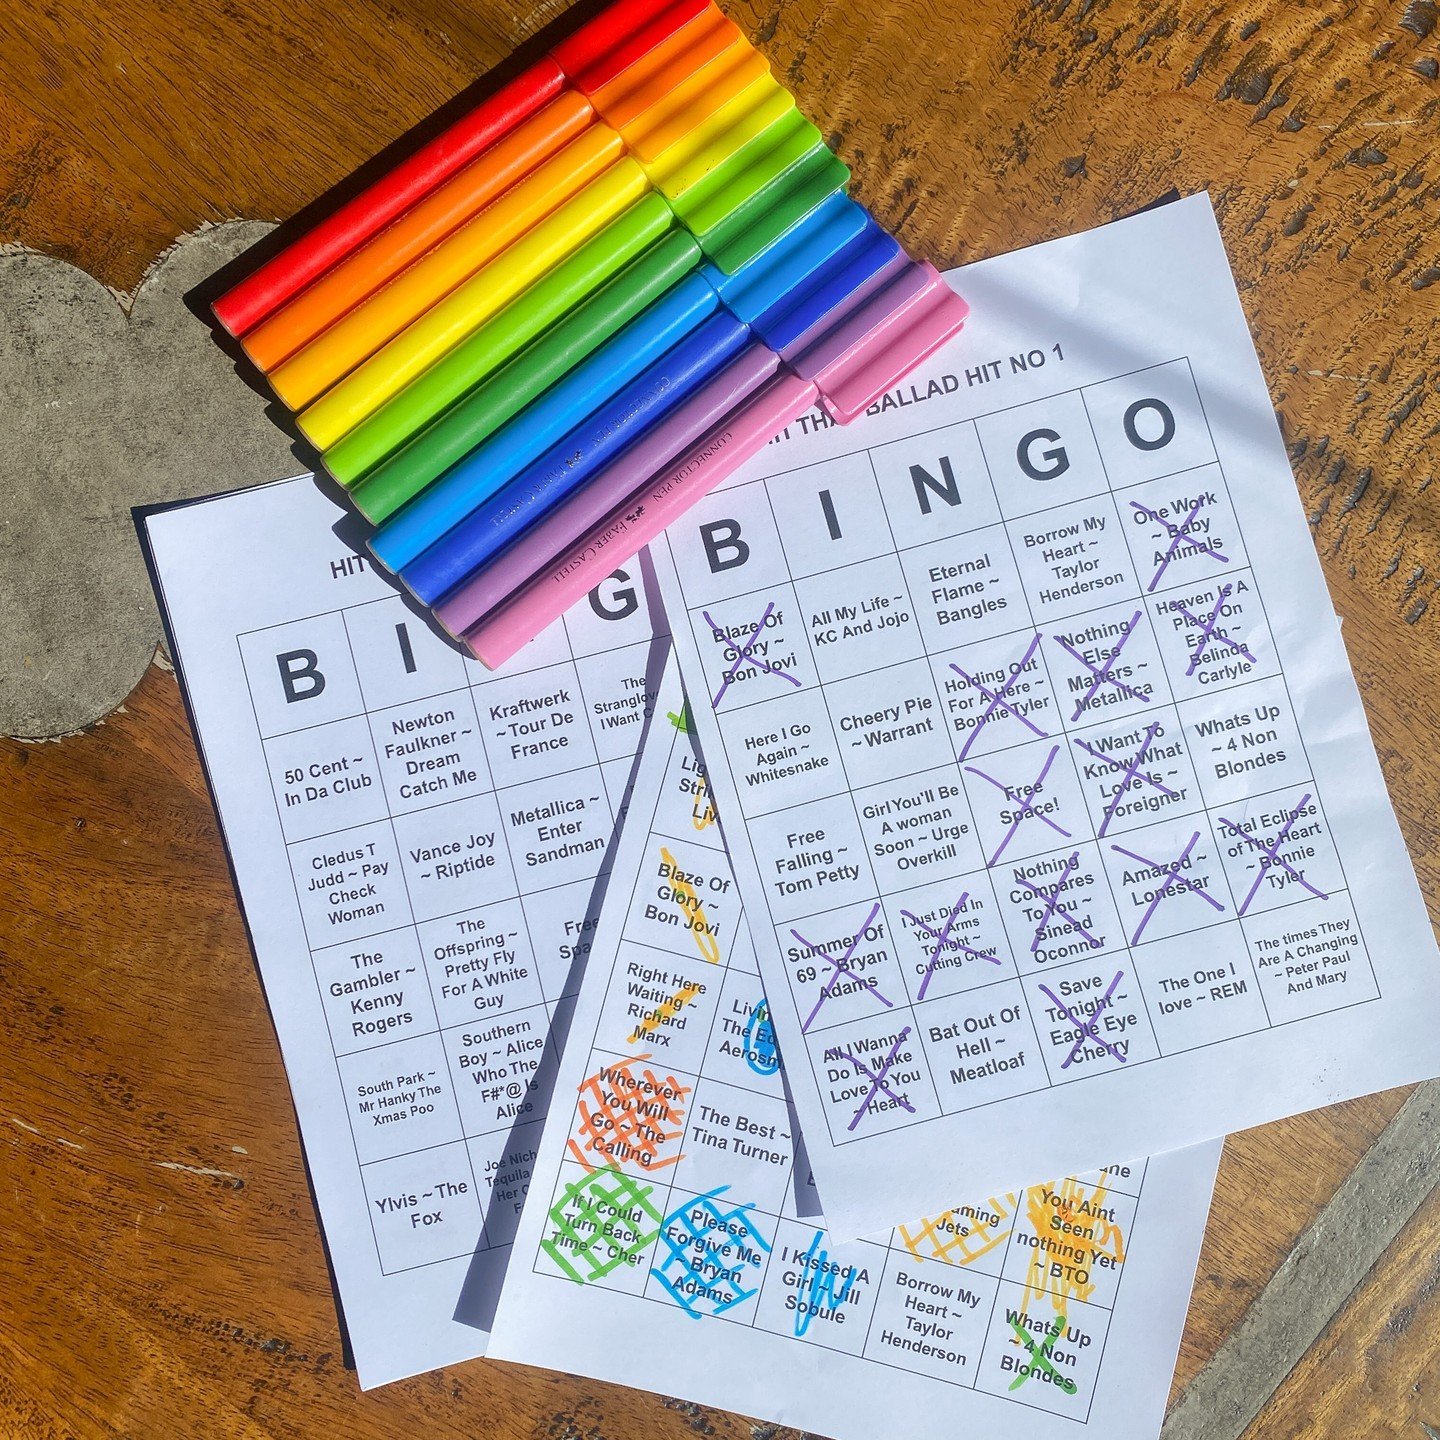 Musical Bingo is on tonight! 😍🎶
If you've never played it before, it's super simple:

1. Get your Bingo card...
Grab a drink and take a seat

2. Listen to the music...
Listen to the songs played by your host, and check your Bingo Card. You've got 4